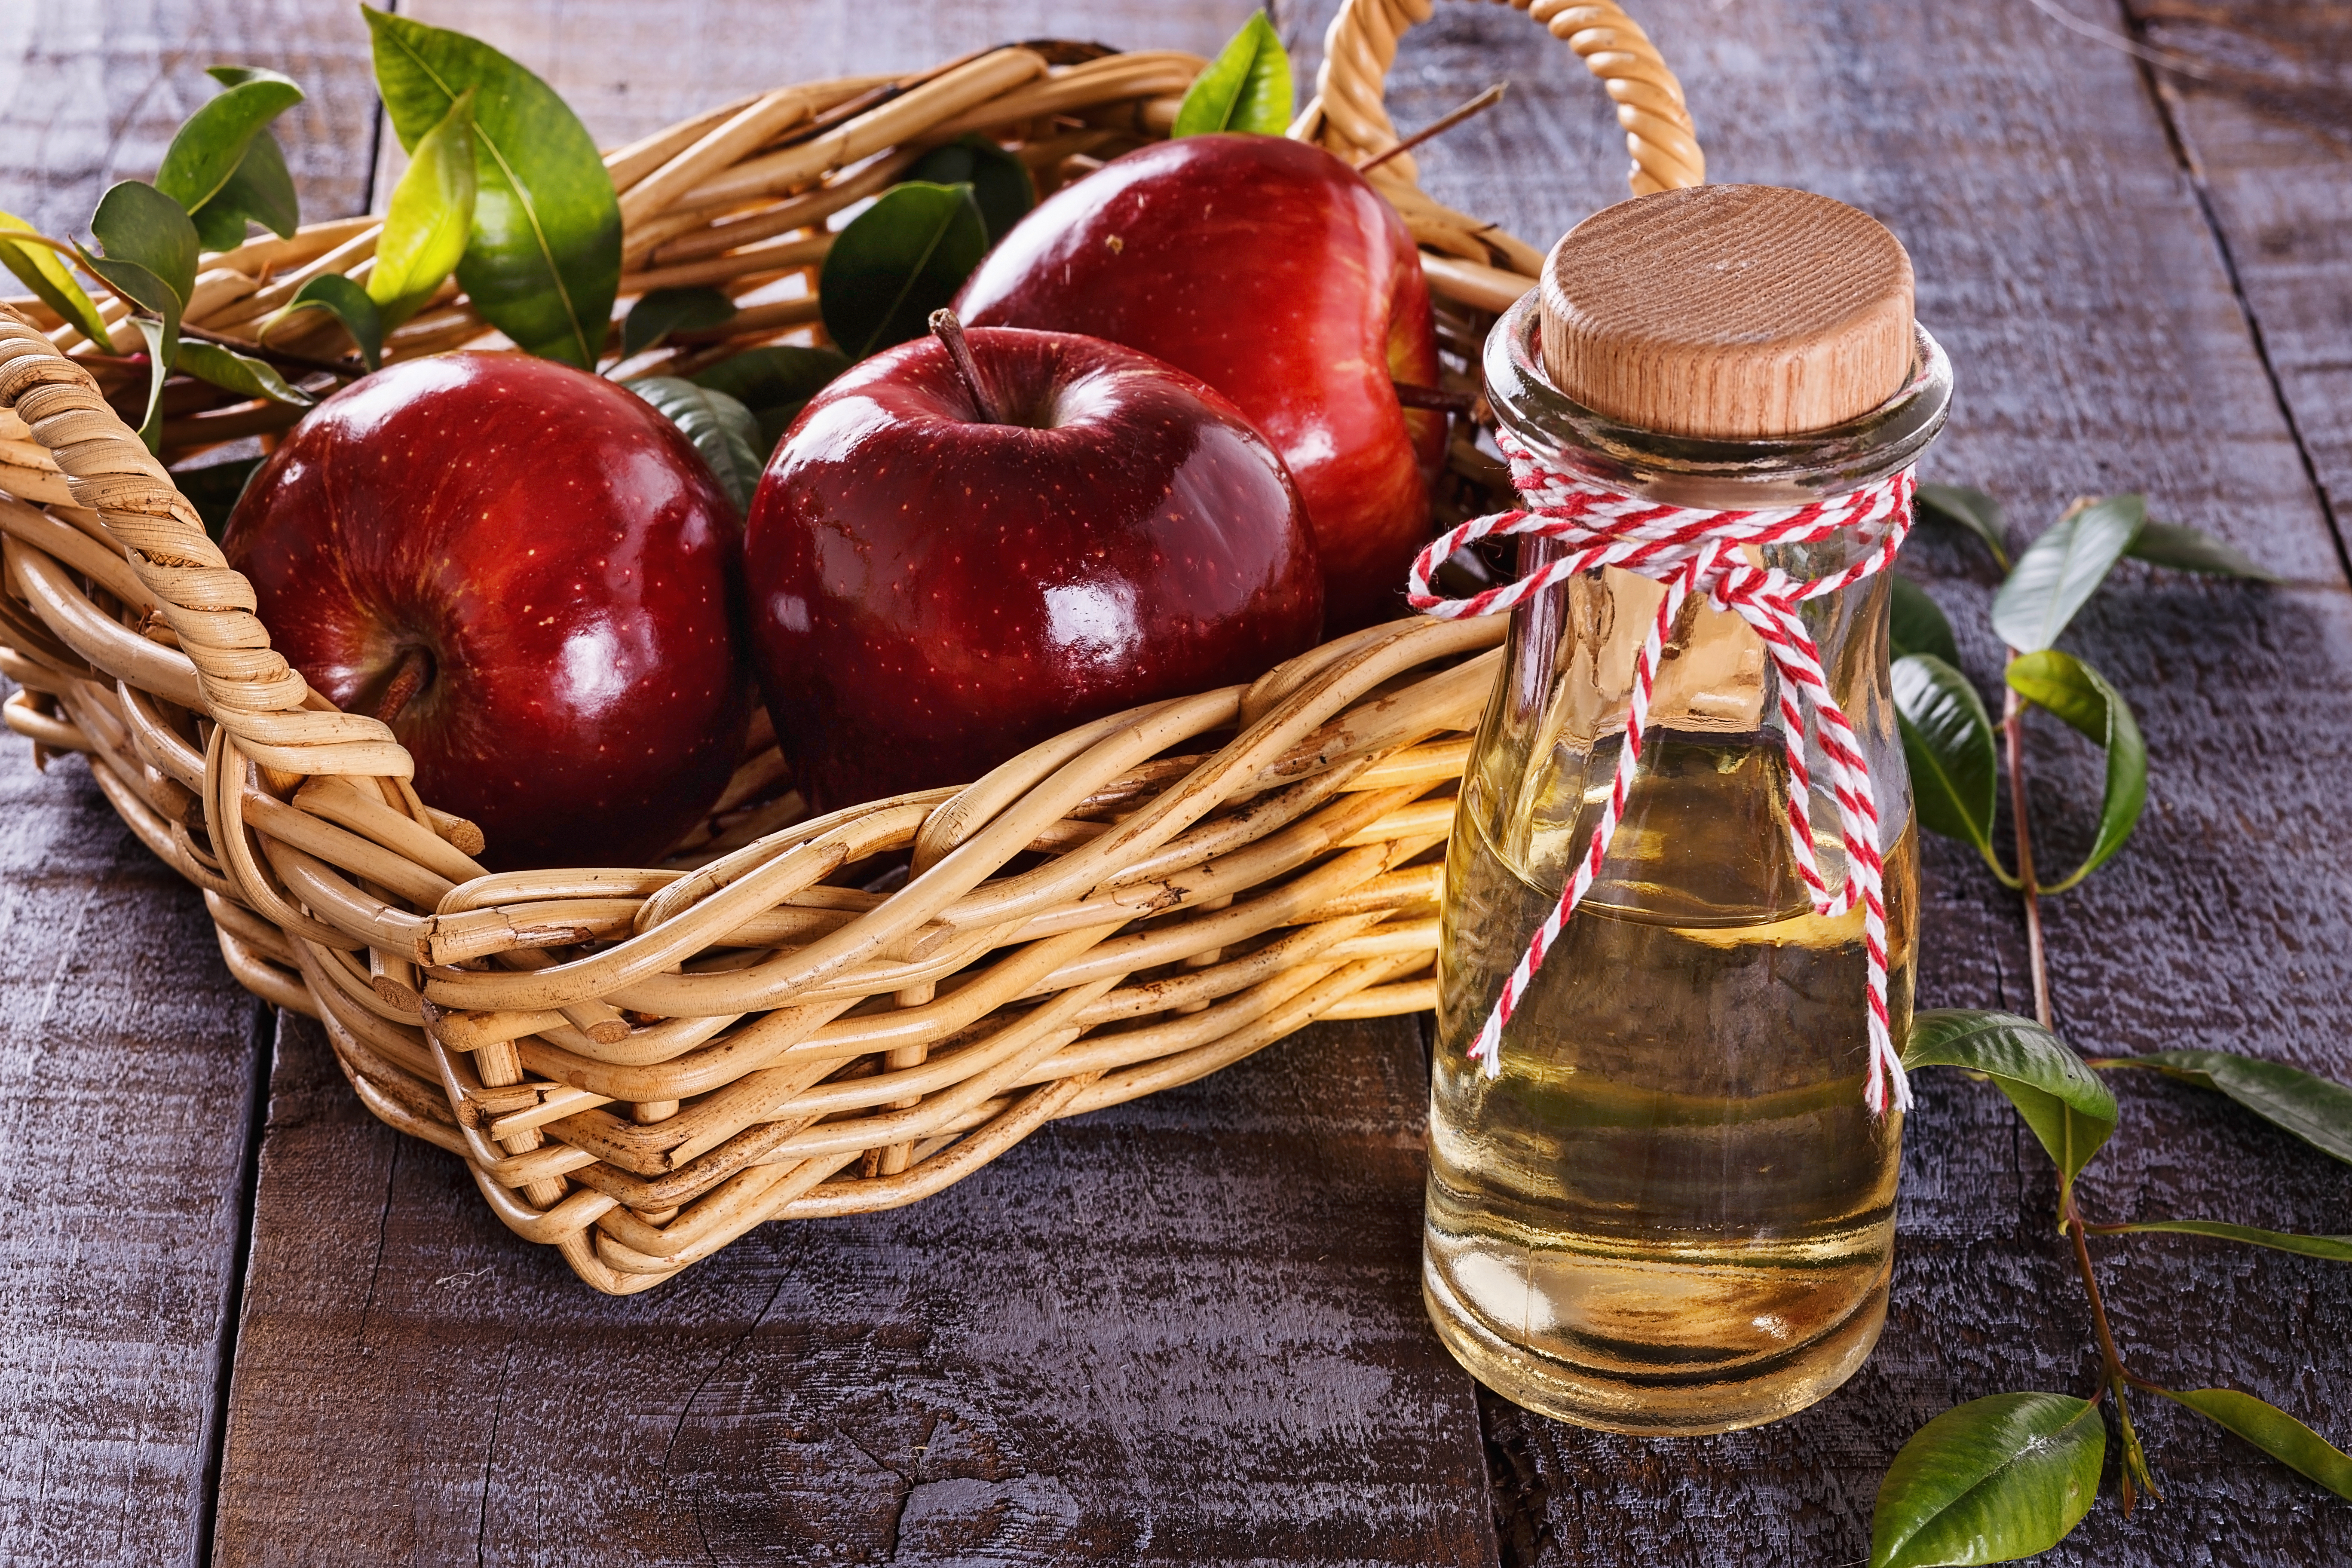 How Long Does It Take for Apple Cider Vinegar to Work?